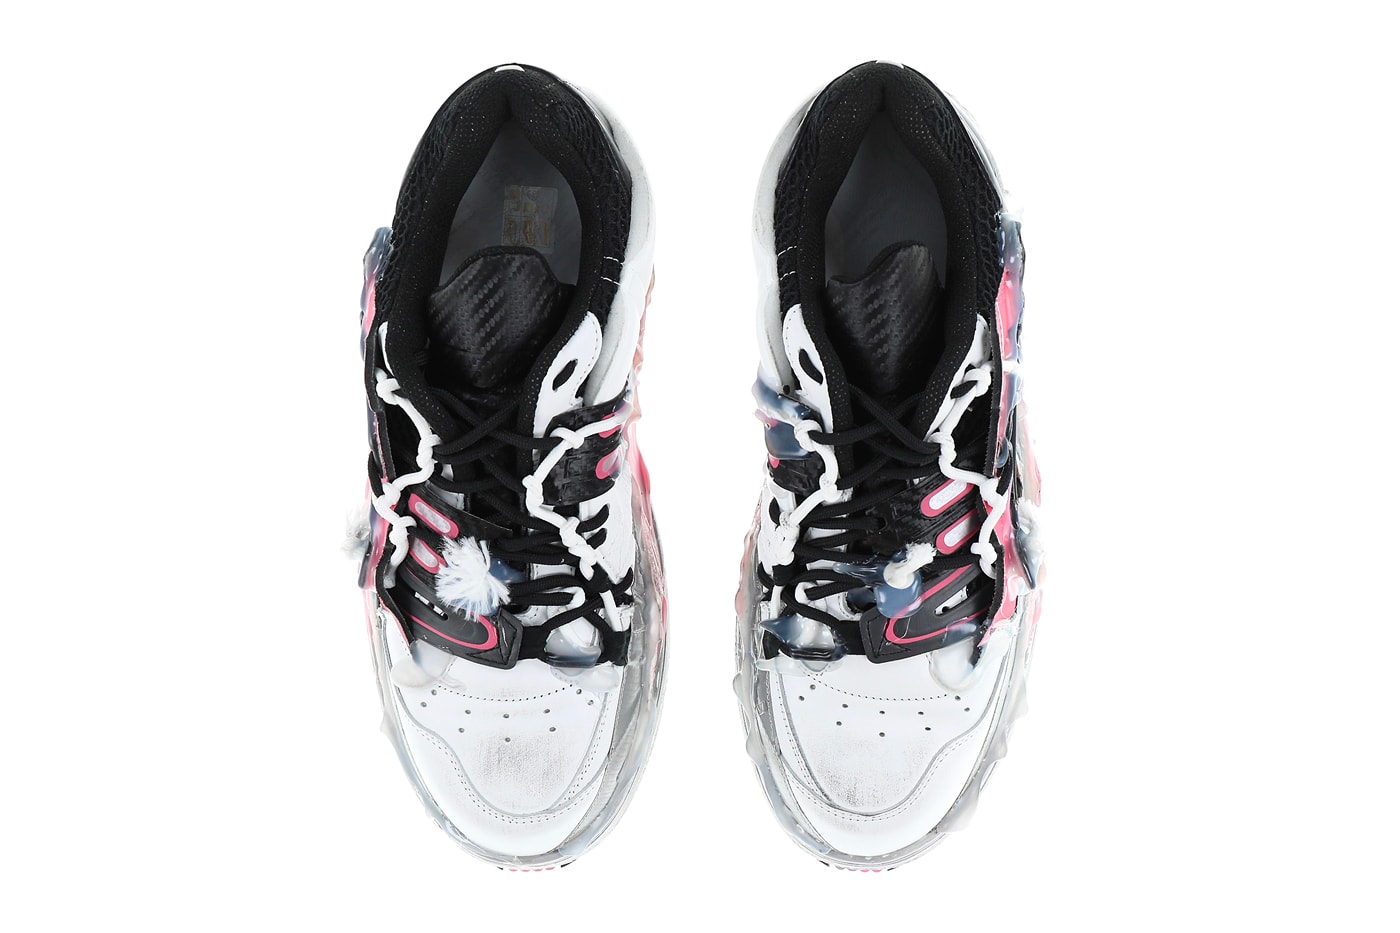 Maison Margiela Fusion Low Top Sneakers “Bubblegum Mix" Release info deconstructed hot glue duct tape maximalism shoes footwear distressed S57WS0257 Nubian Cow Leather  drop date price 